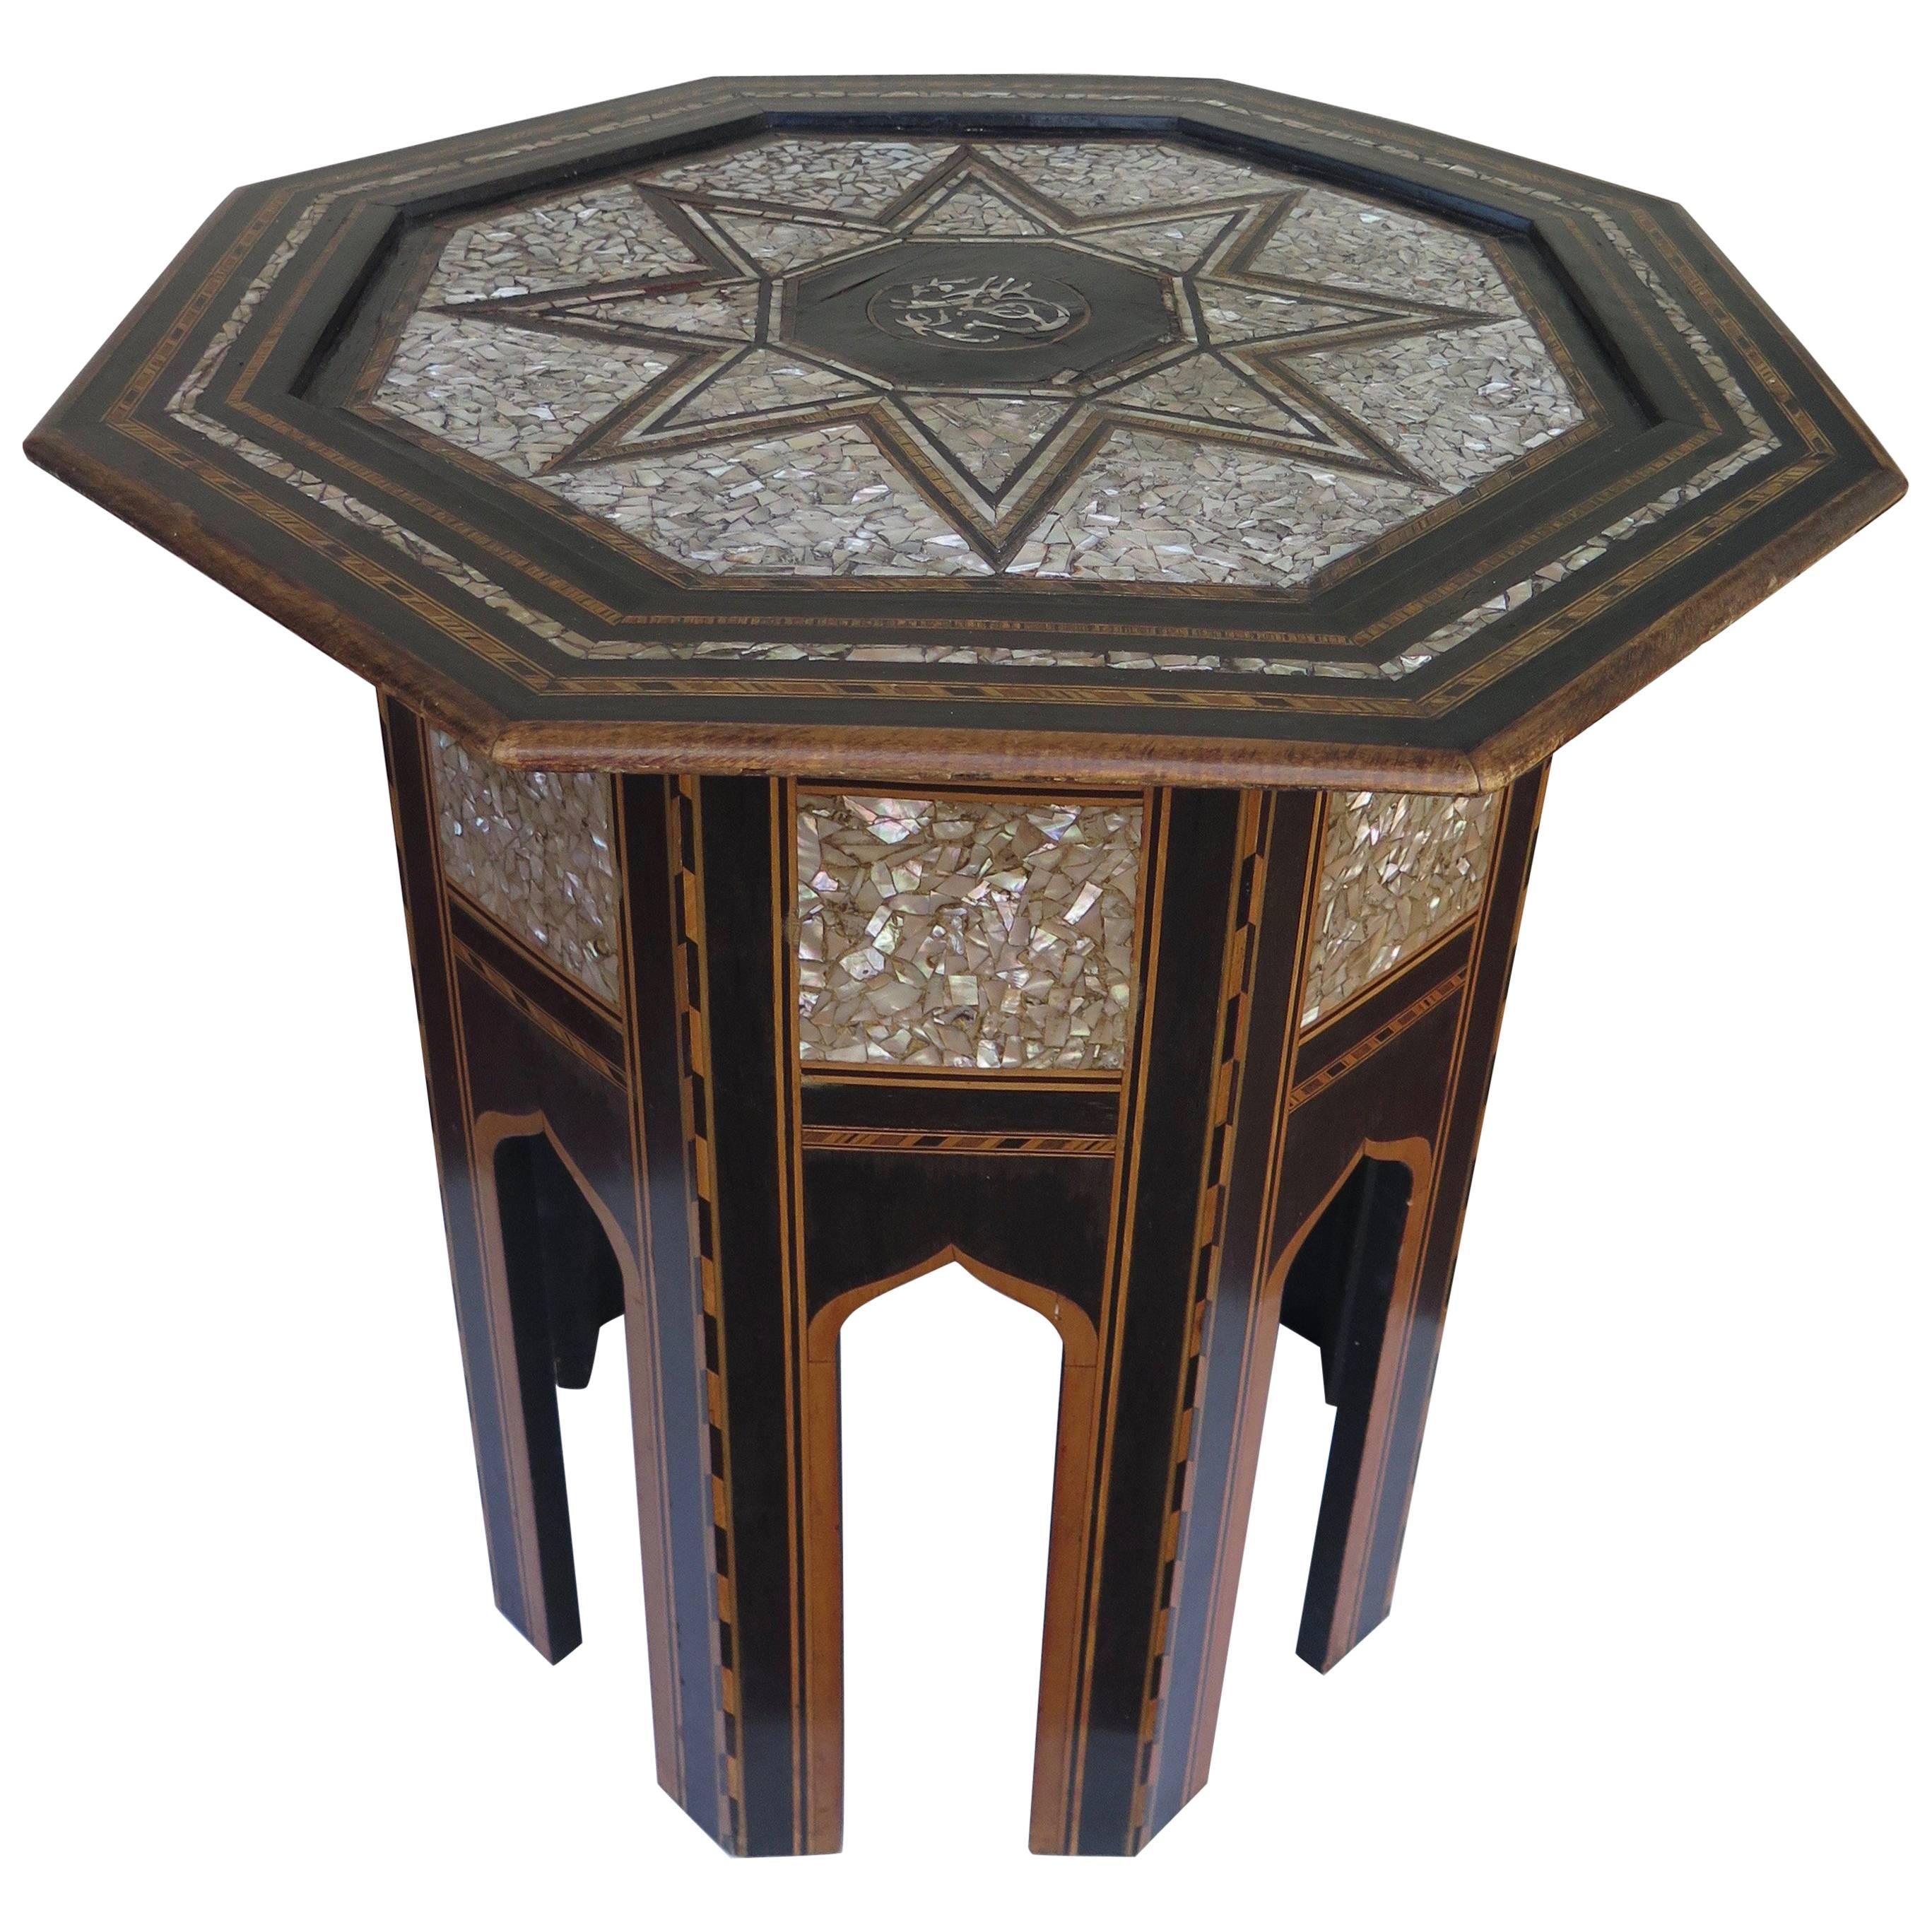 19th Century Ottoman or Moorish End Table with Mother-of-Pearl Haskell 